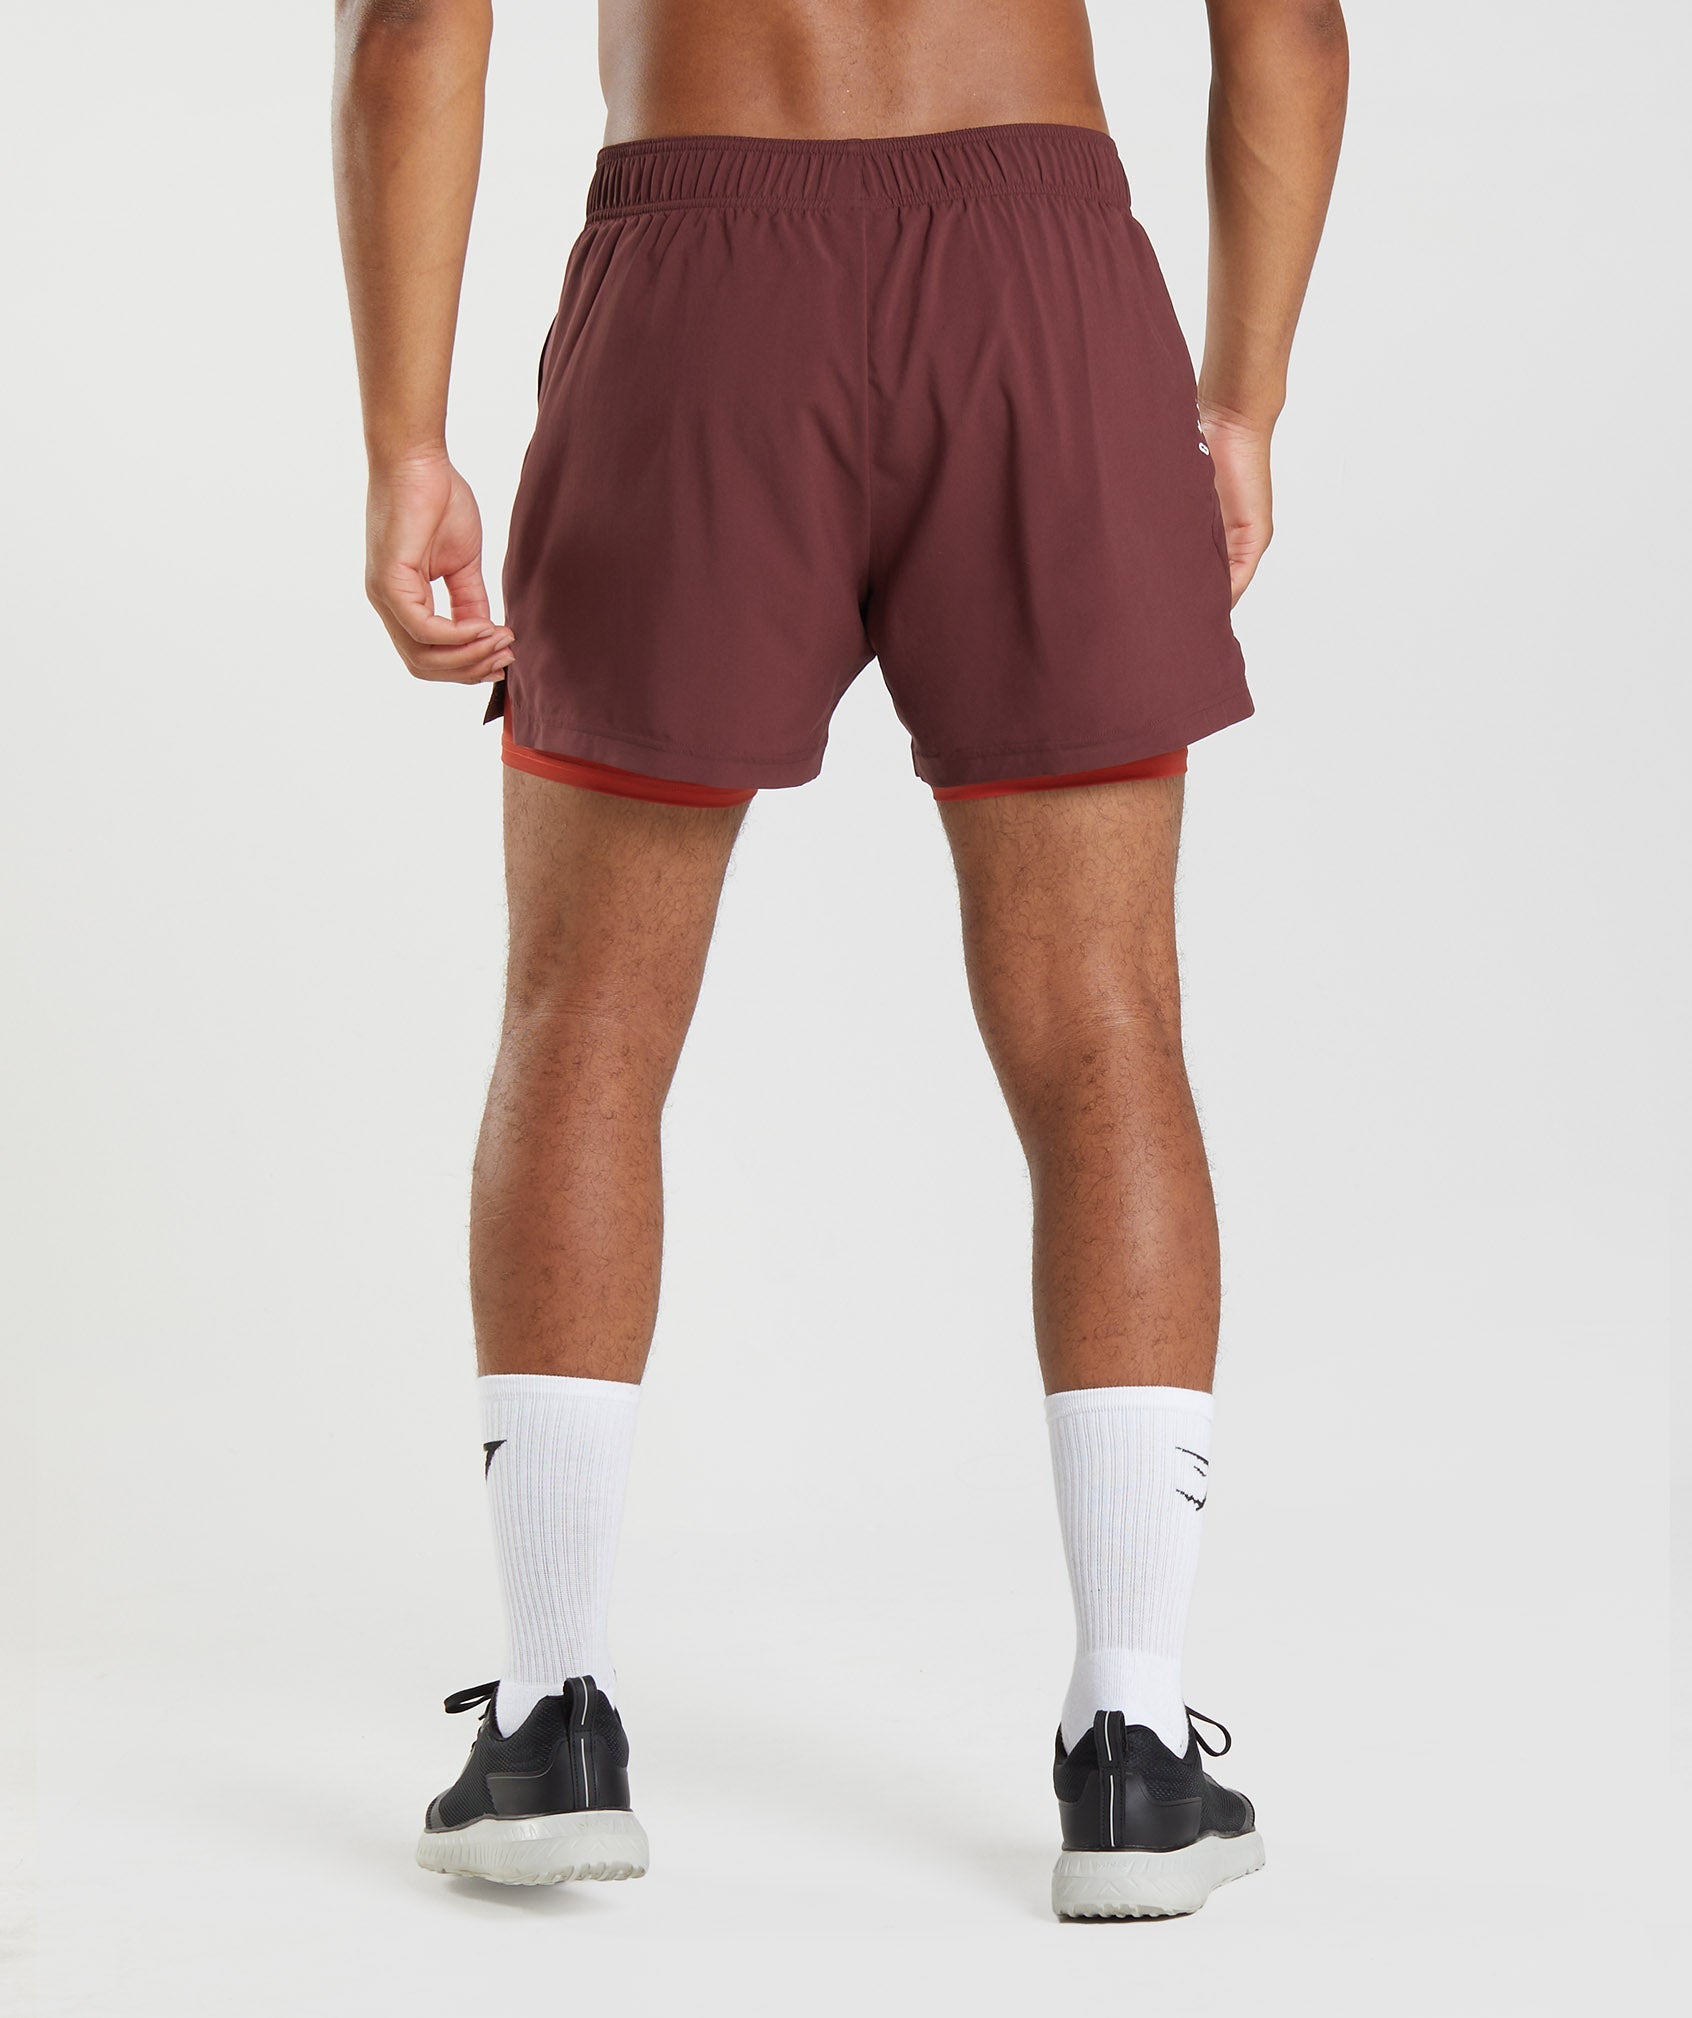 All In Motion Maroon Shorts